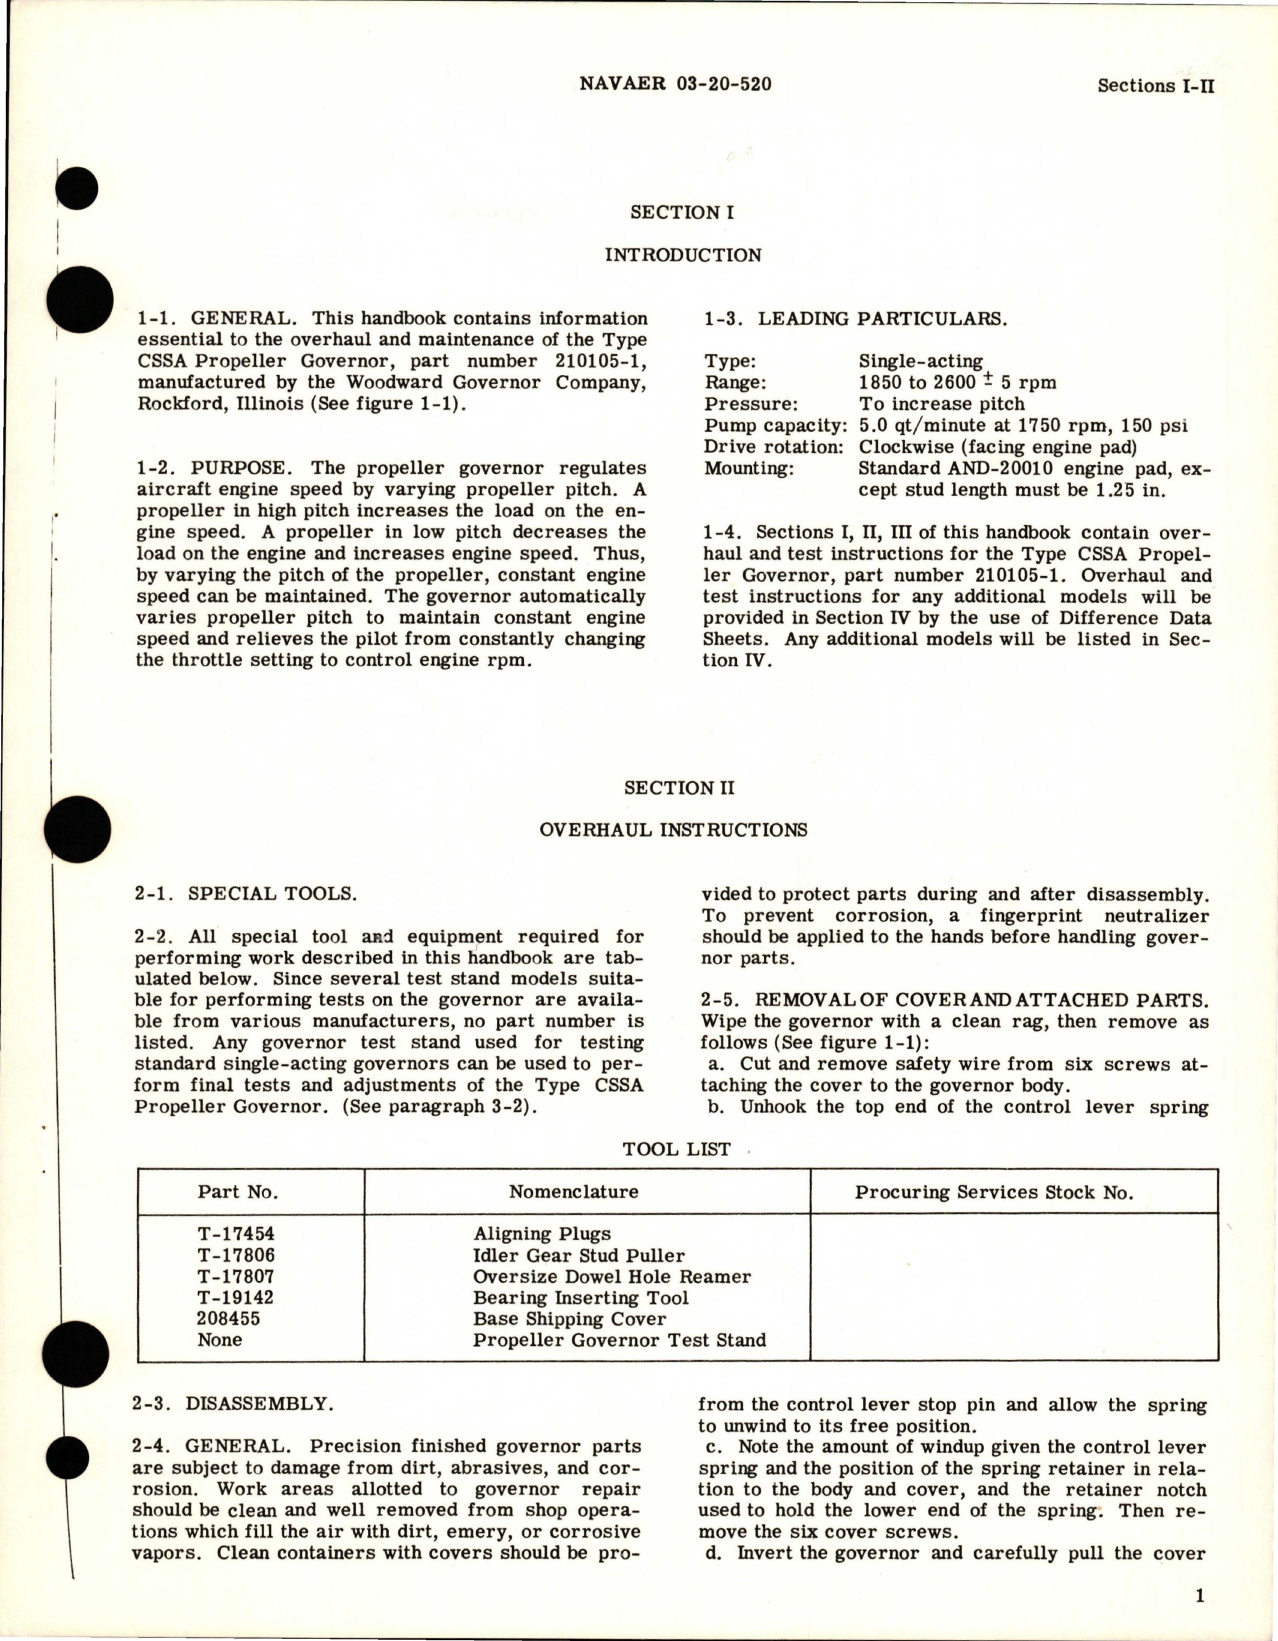 Sample page 5 from AirCorps Library document: Overhaul Instructions for Propeller Governor - Type CSSA - Part 210105-1